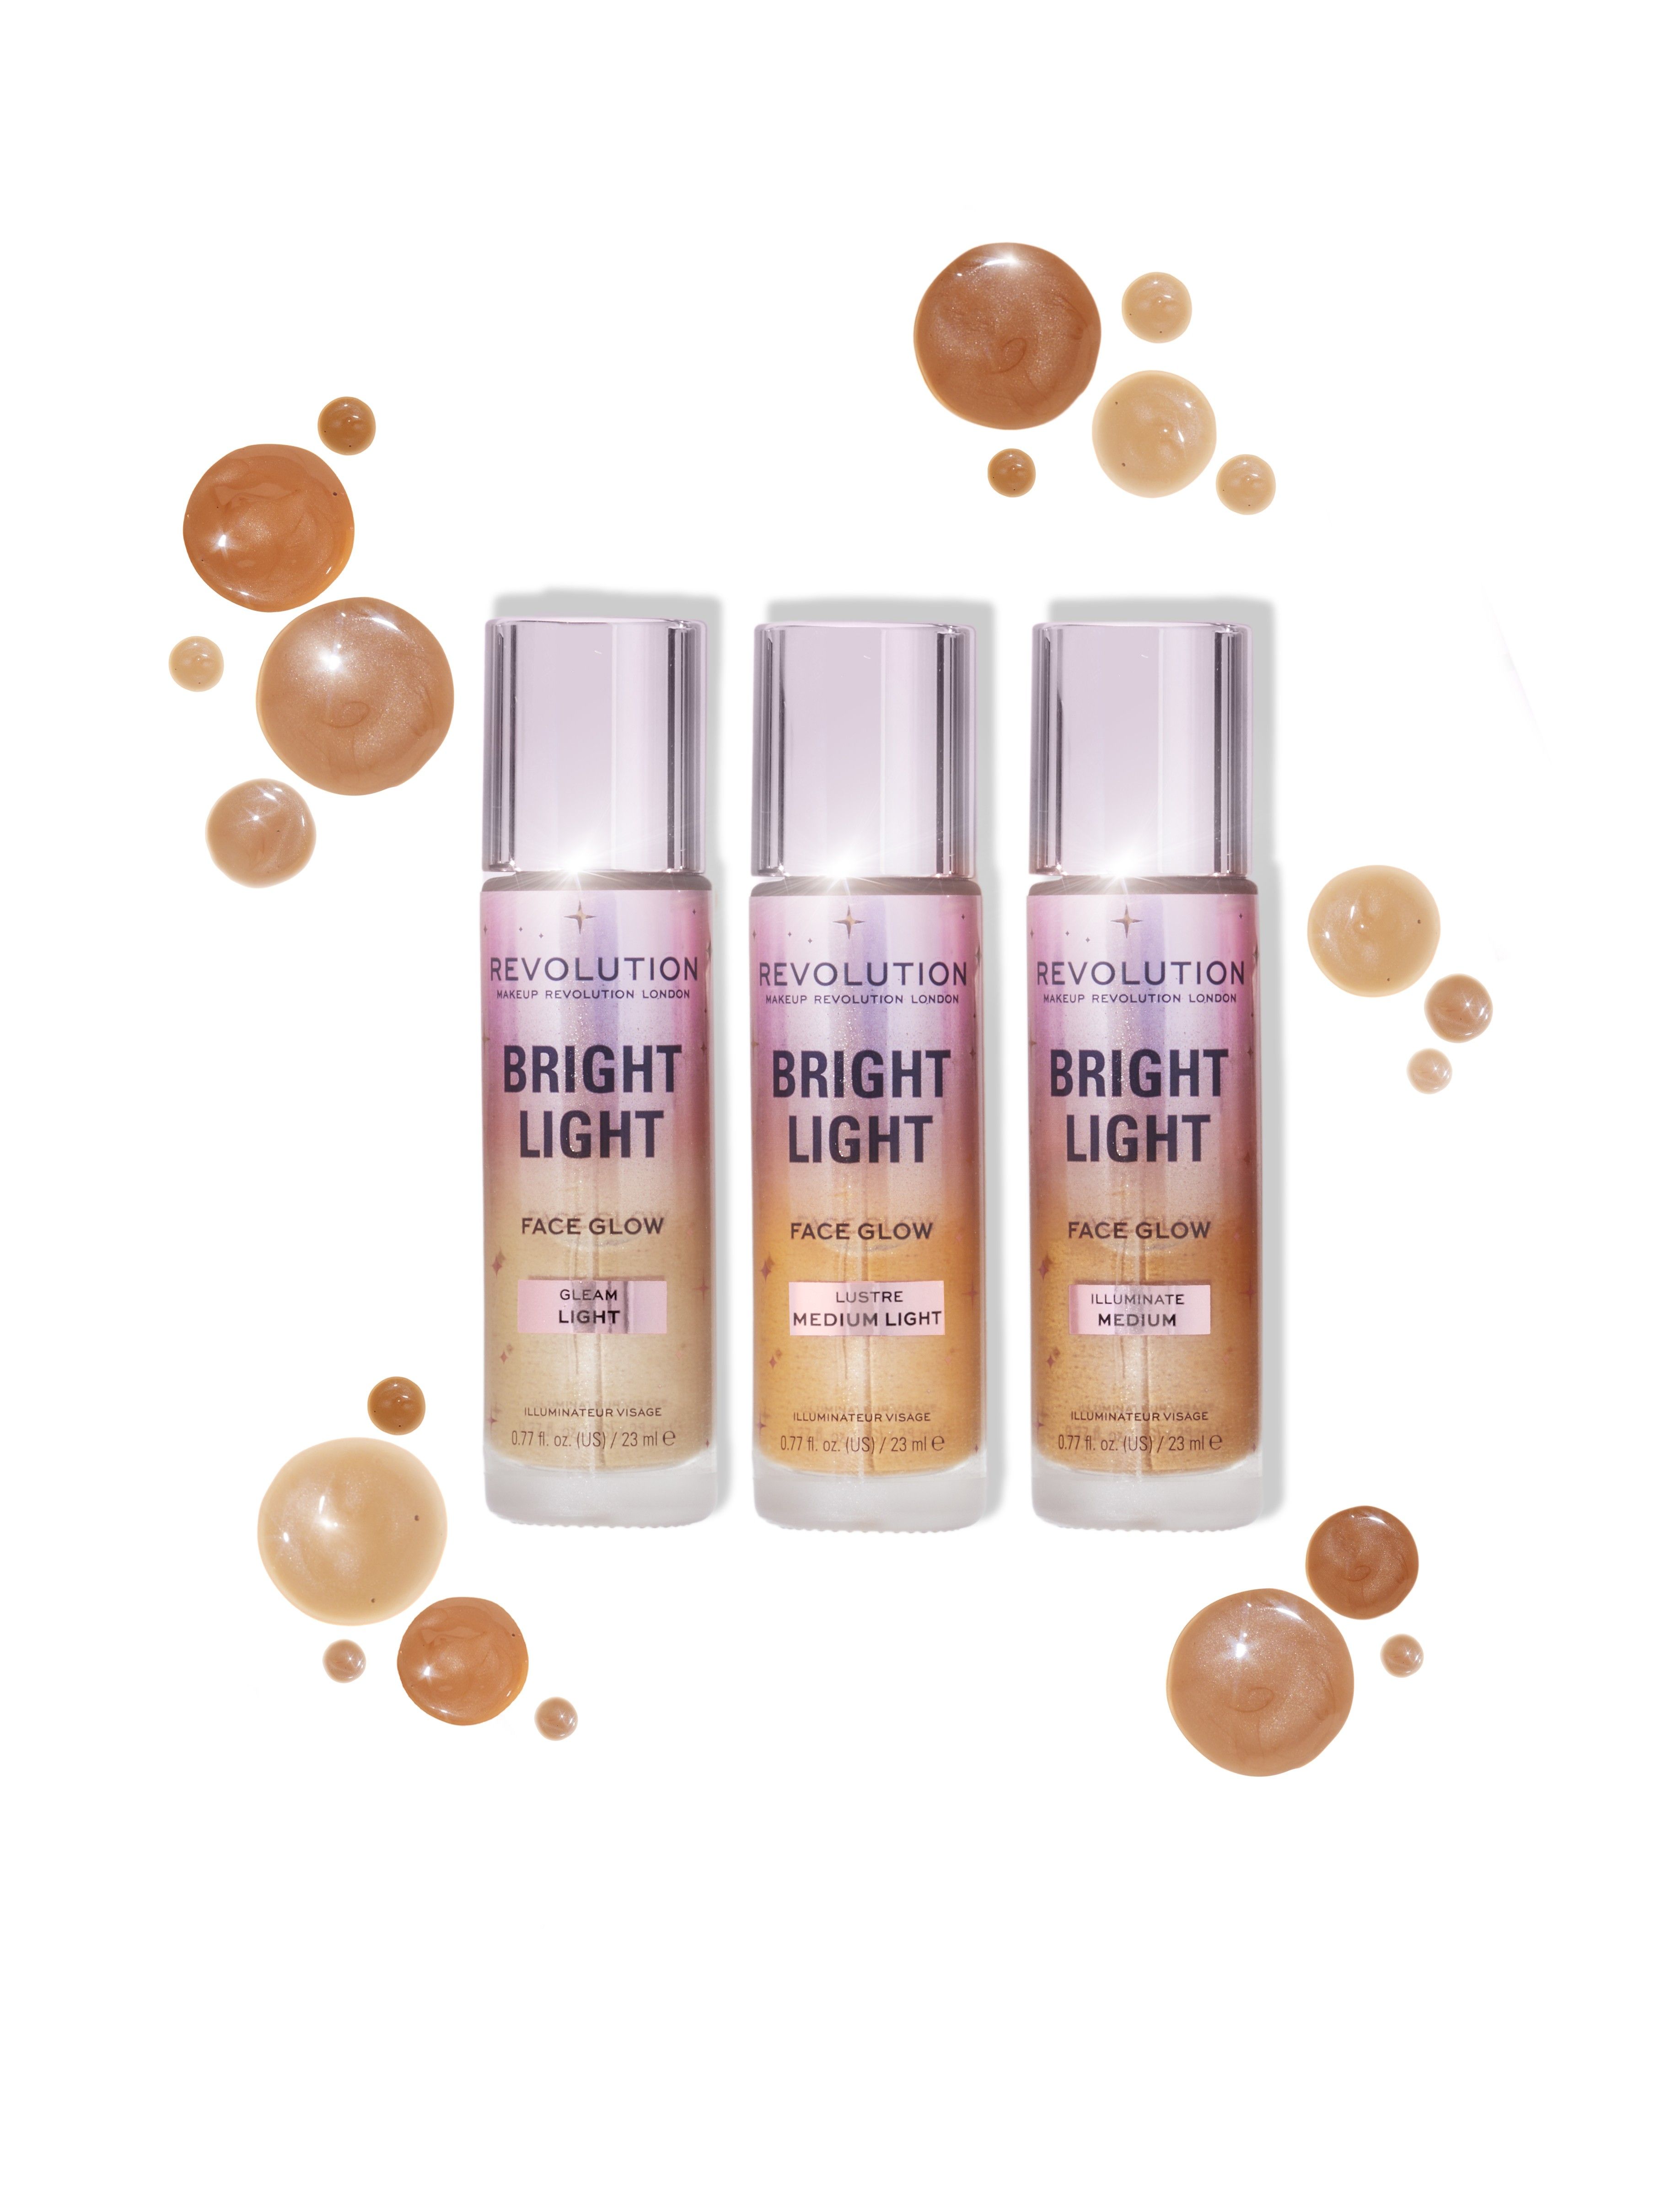 NEW MAKEUP REVOLUTION BRIGHT LIGHT FACE GLOW FOUNDATION Review *I